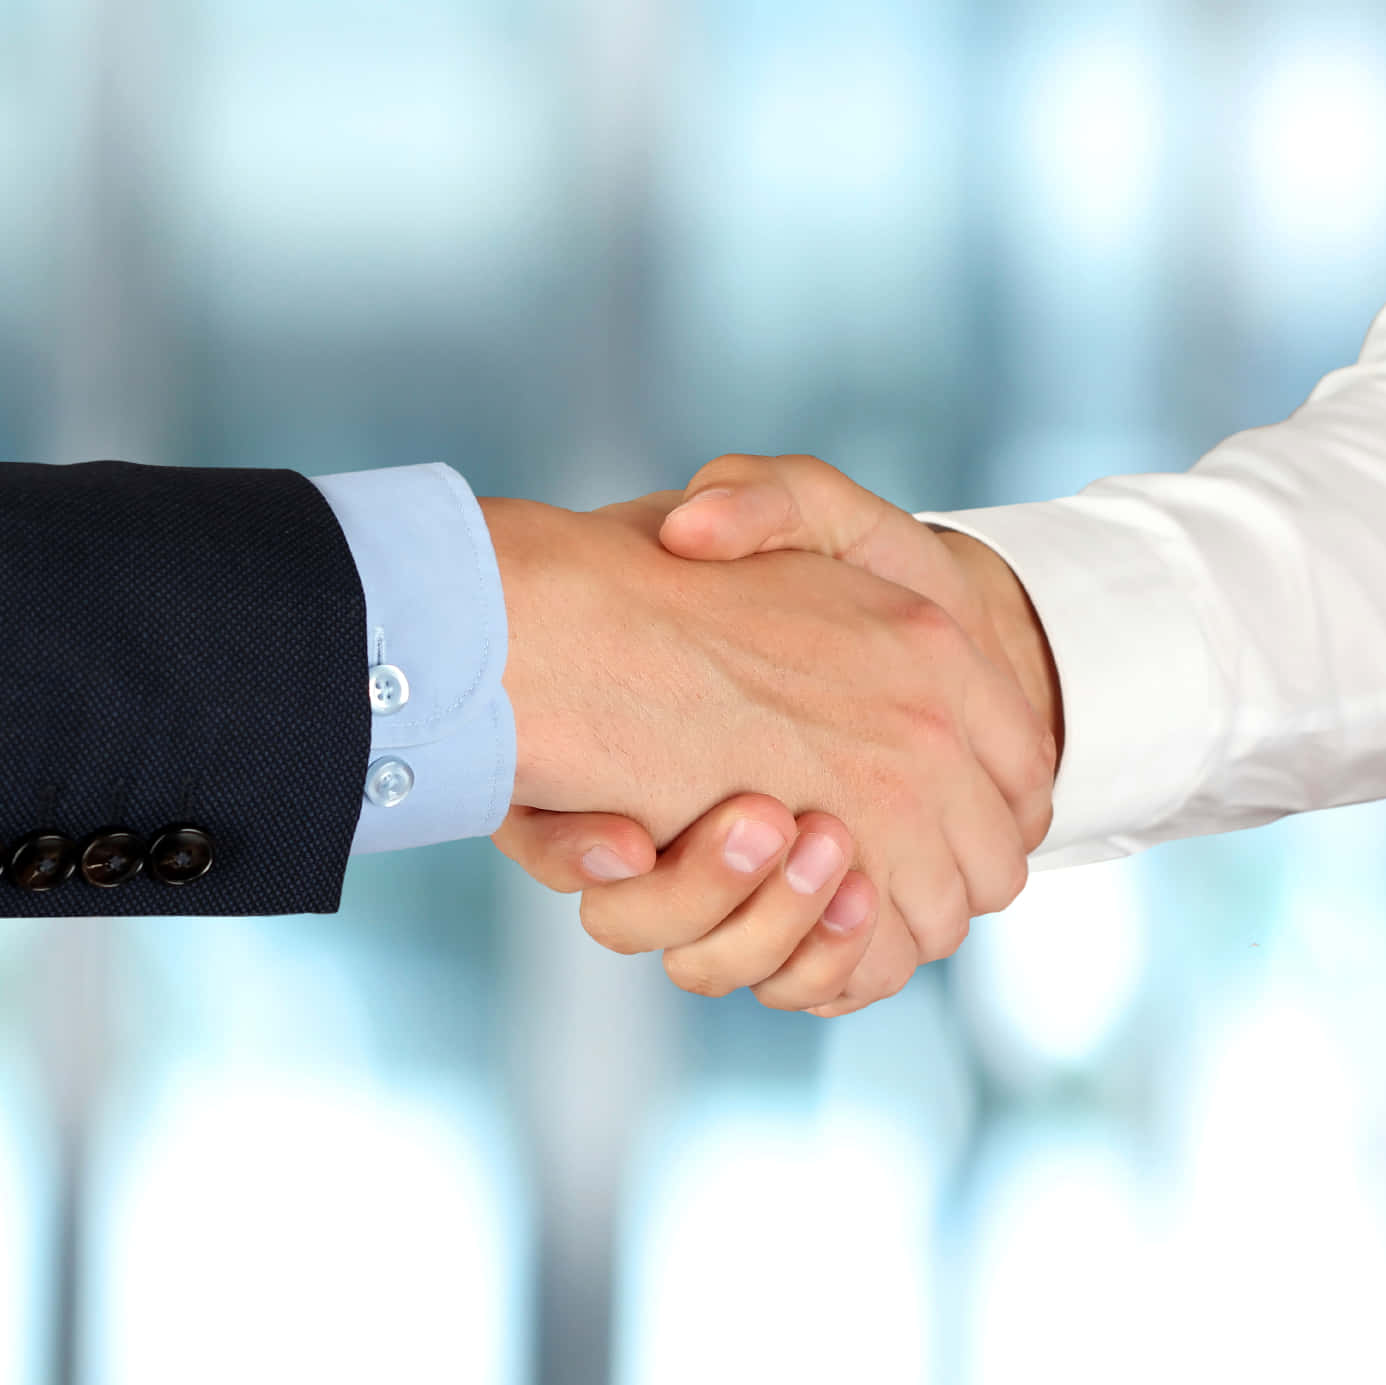 Handshake In Blurred Office Picture